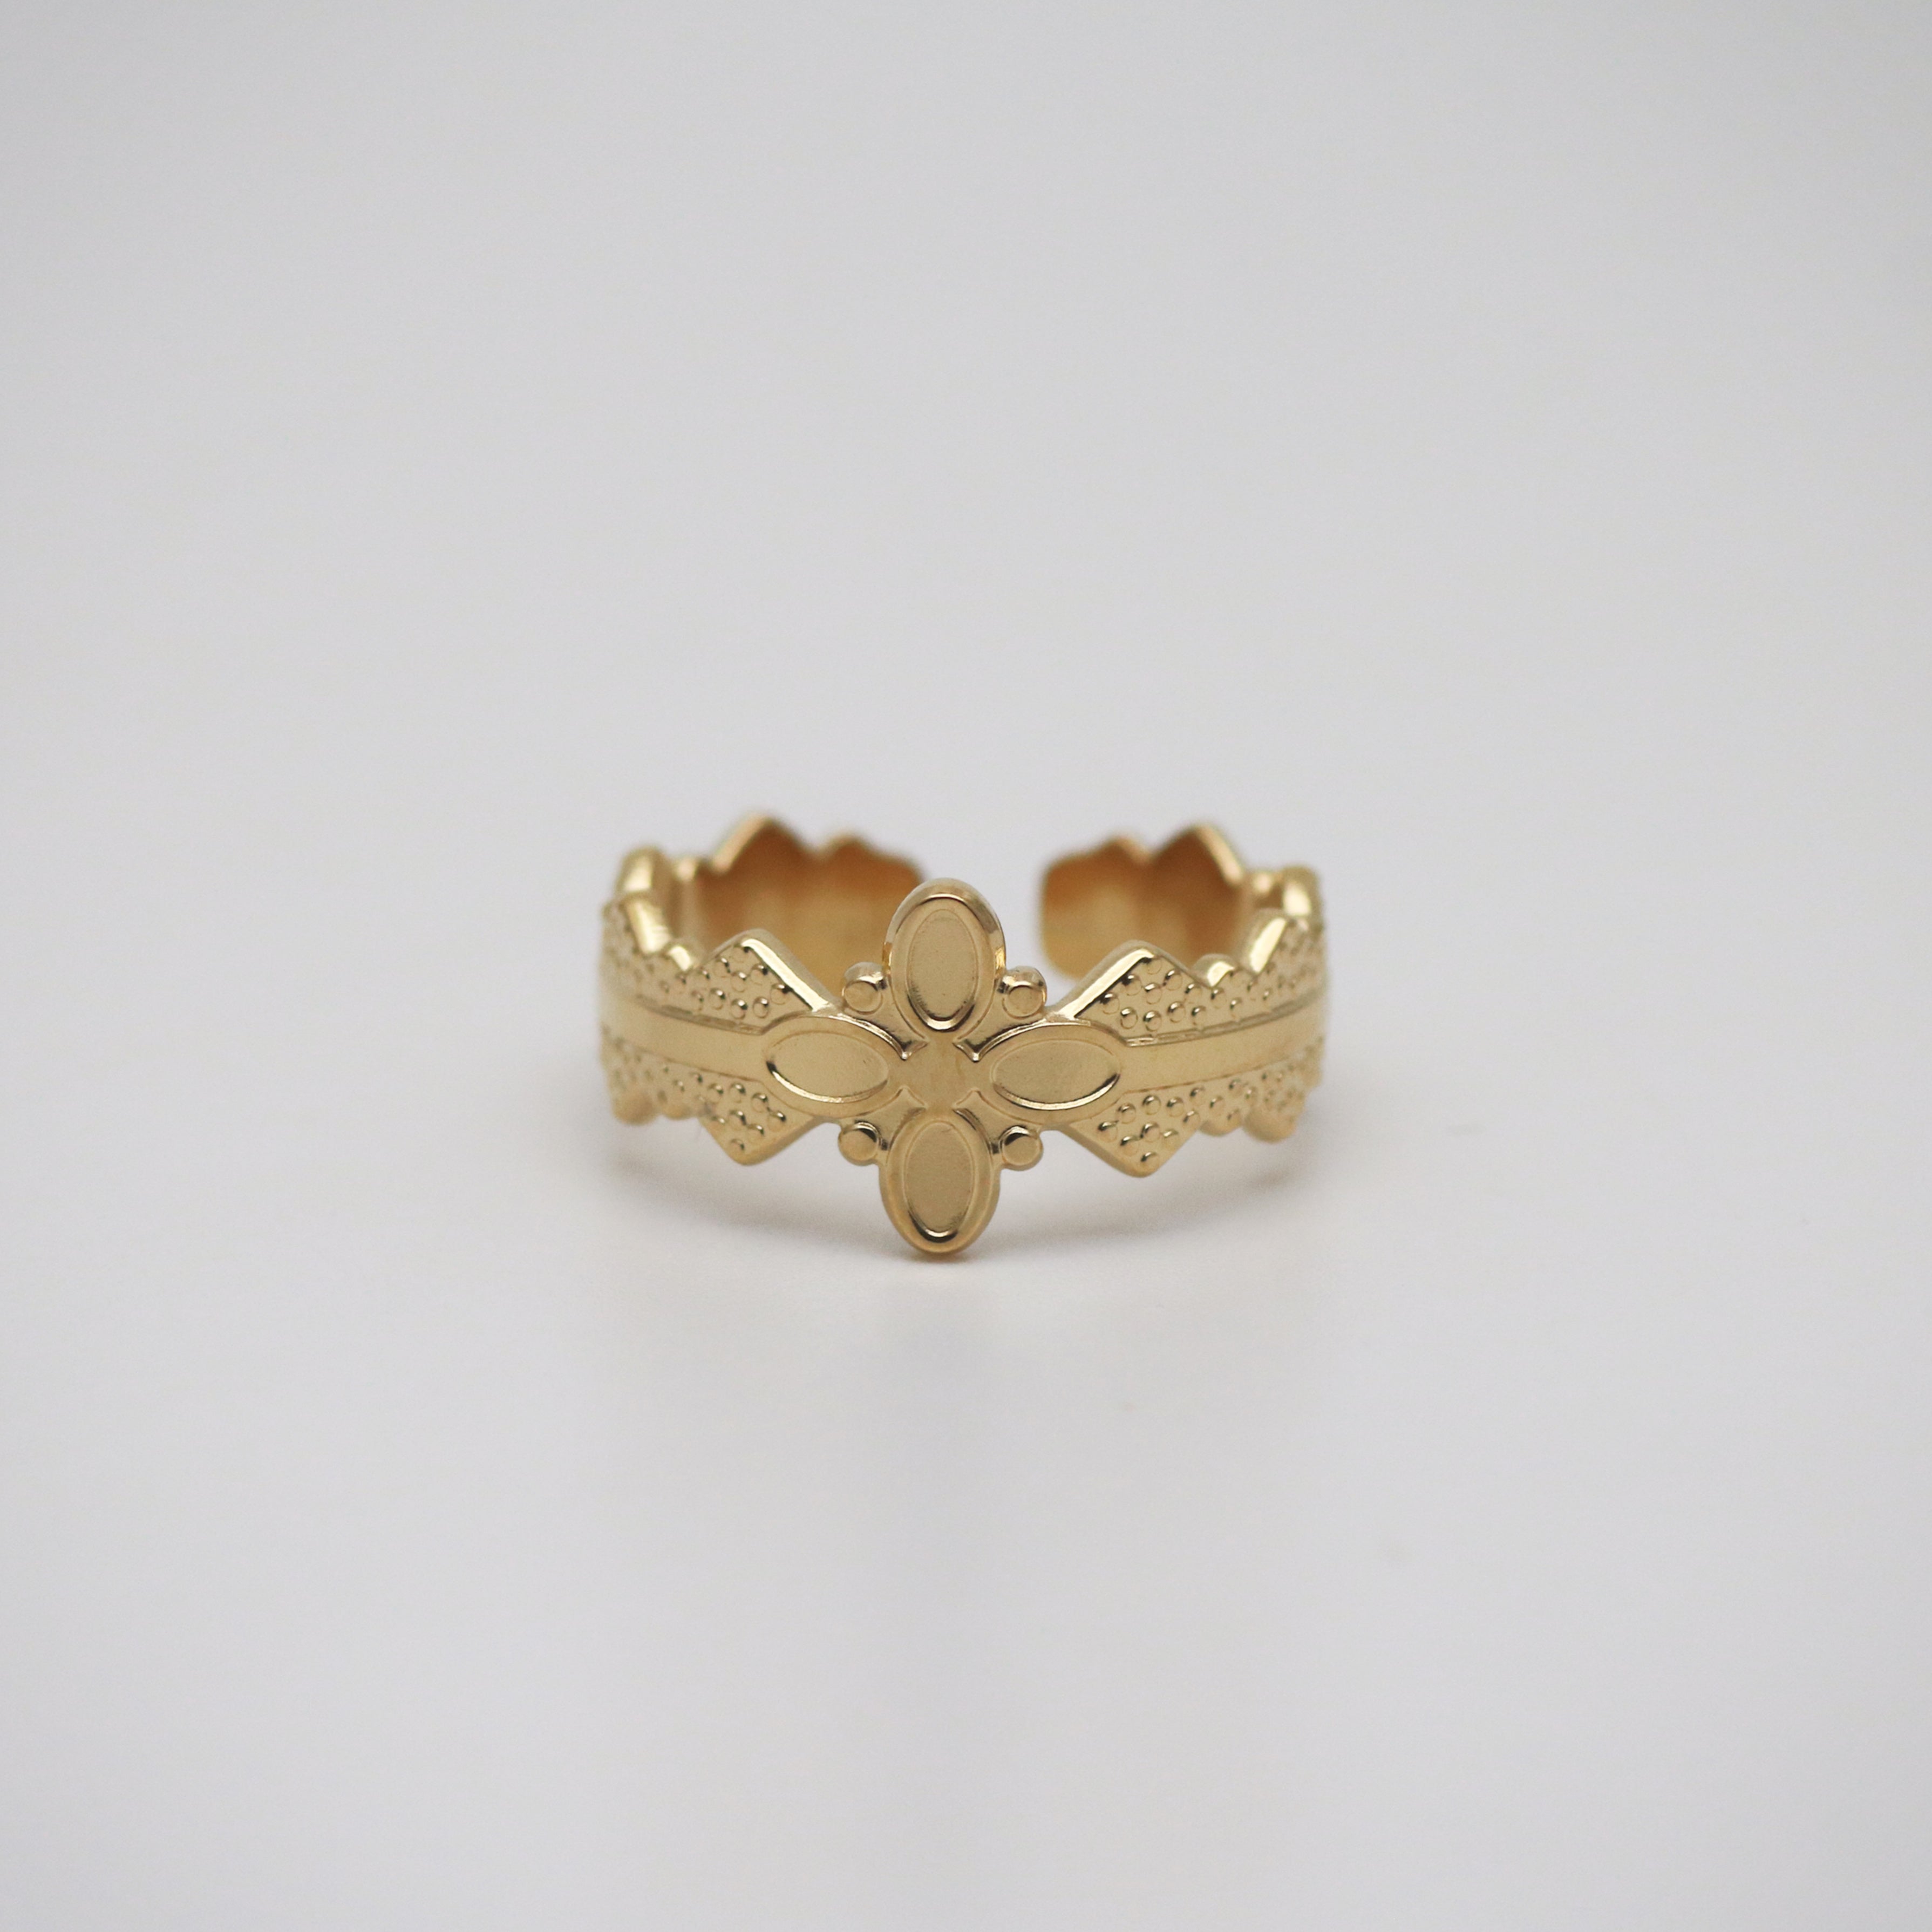 gold lance band ring in vintage style